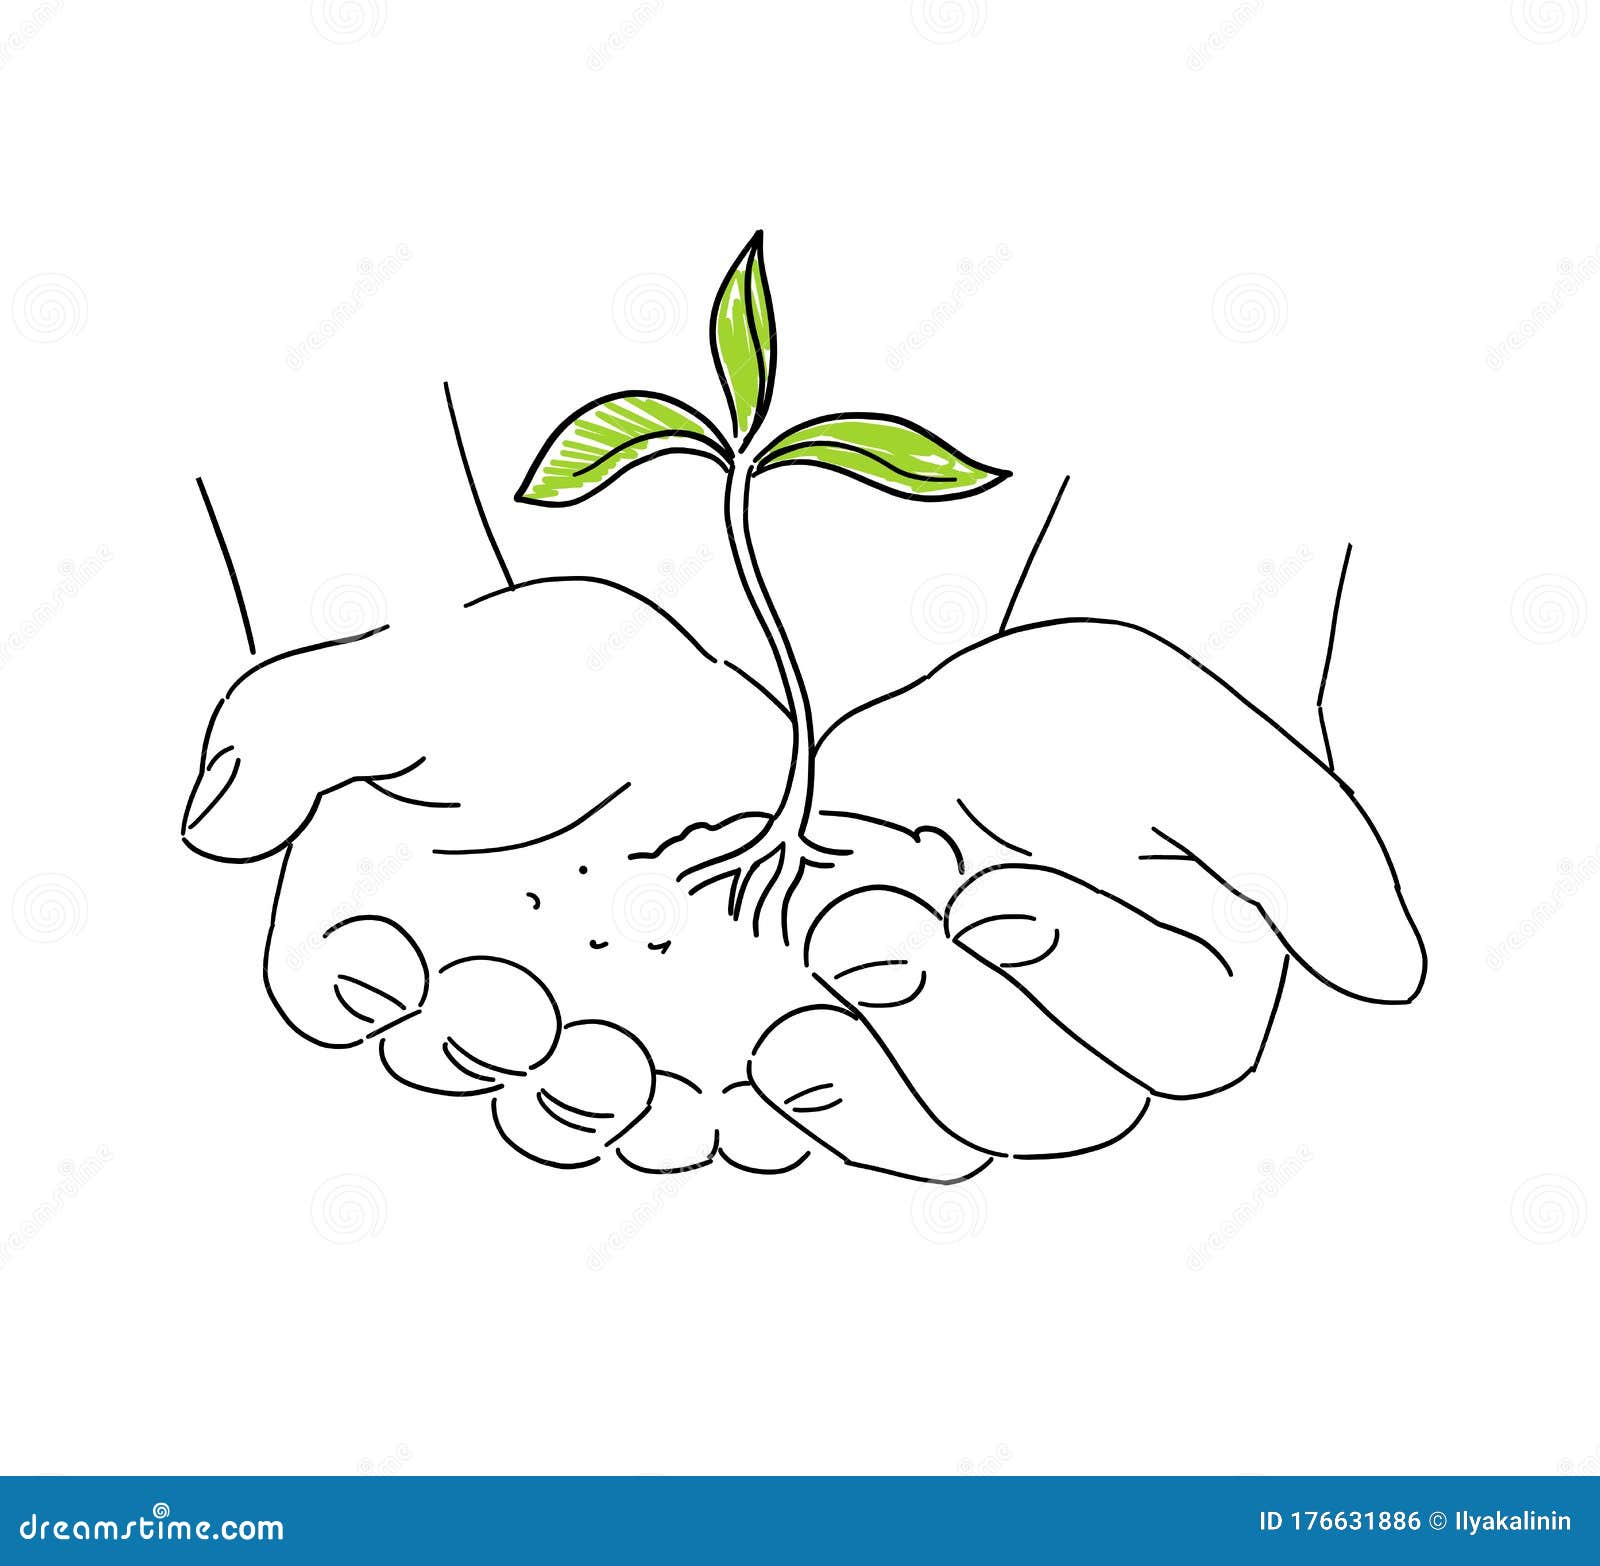 8800 Seed Growth Drawing Stock Photos Pictures  RoyaltyFree Images   iStock